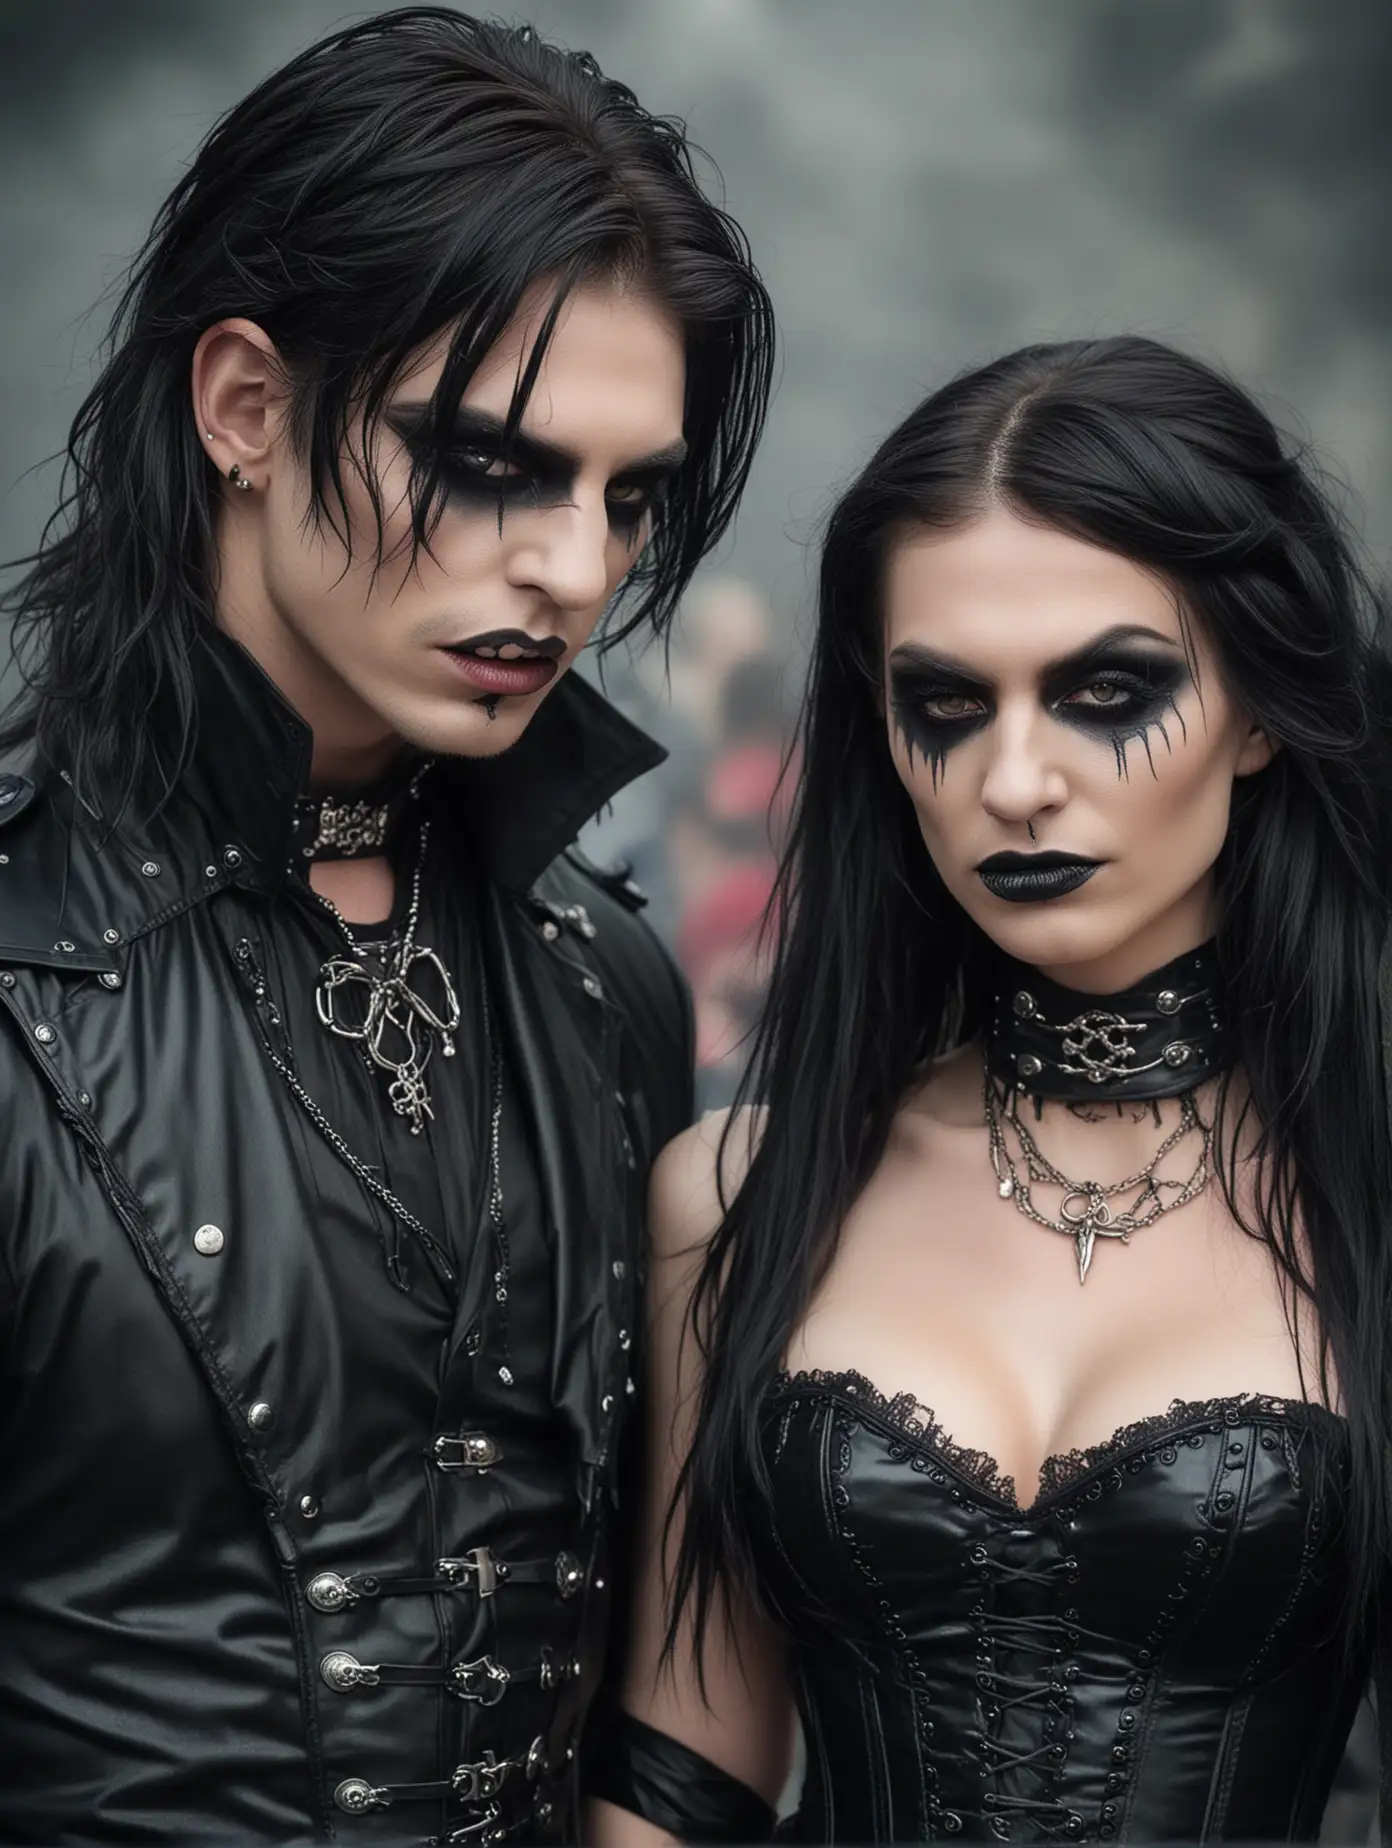 gothic man and woman, smokey eye make up, long black nails,  latex corset, they are at a rock festival, vampire ispired look.